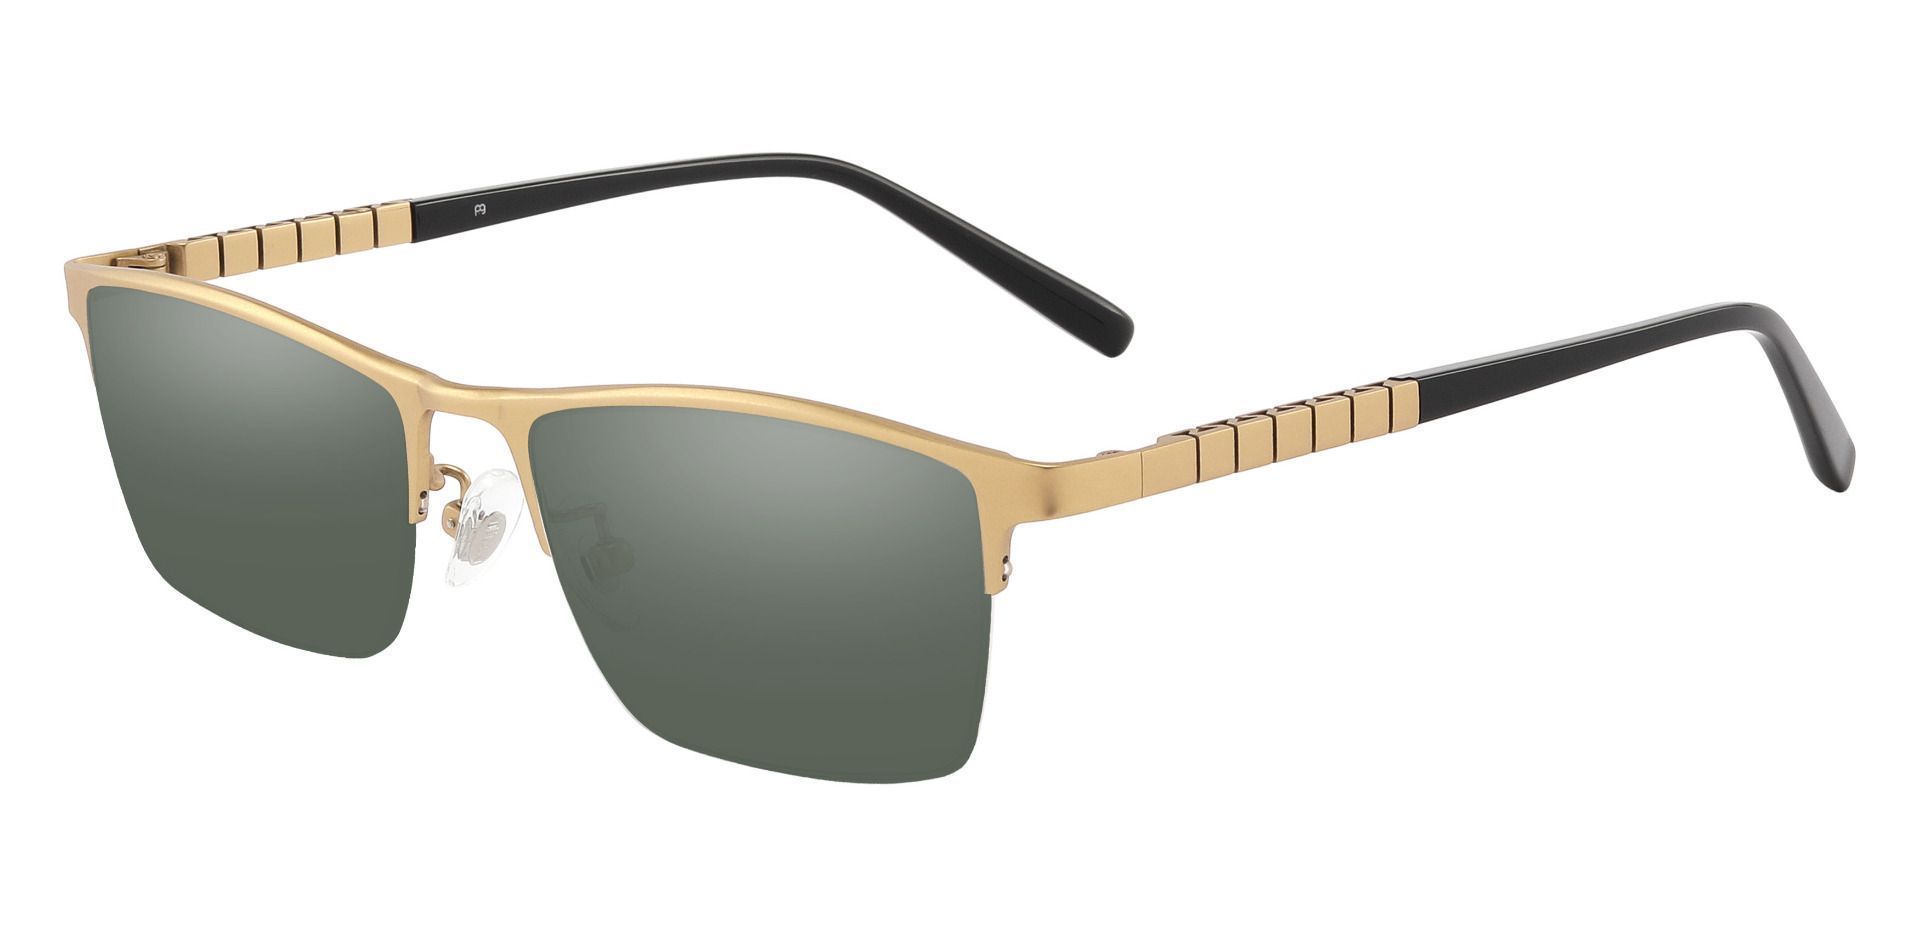 Maine Rectangle Reading Sunglasses - Gold Frame With Green Lenses